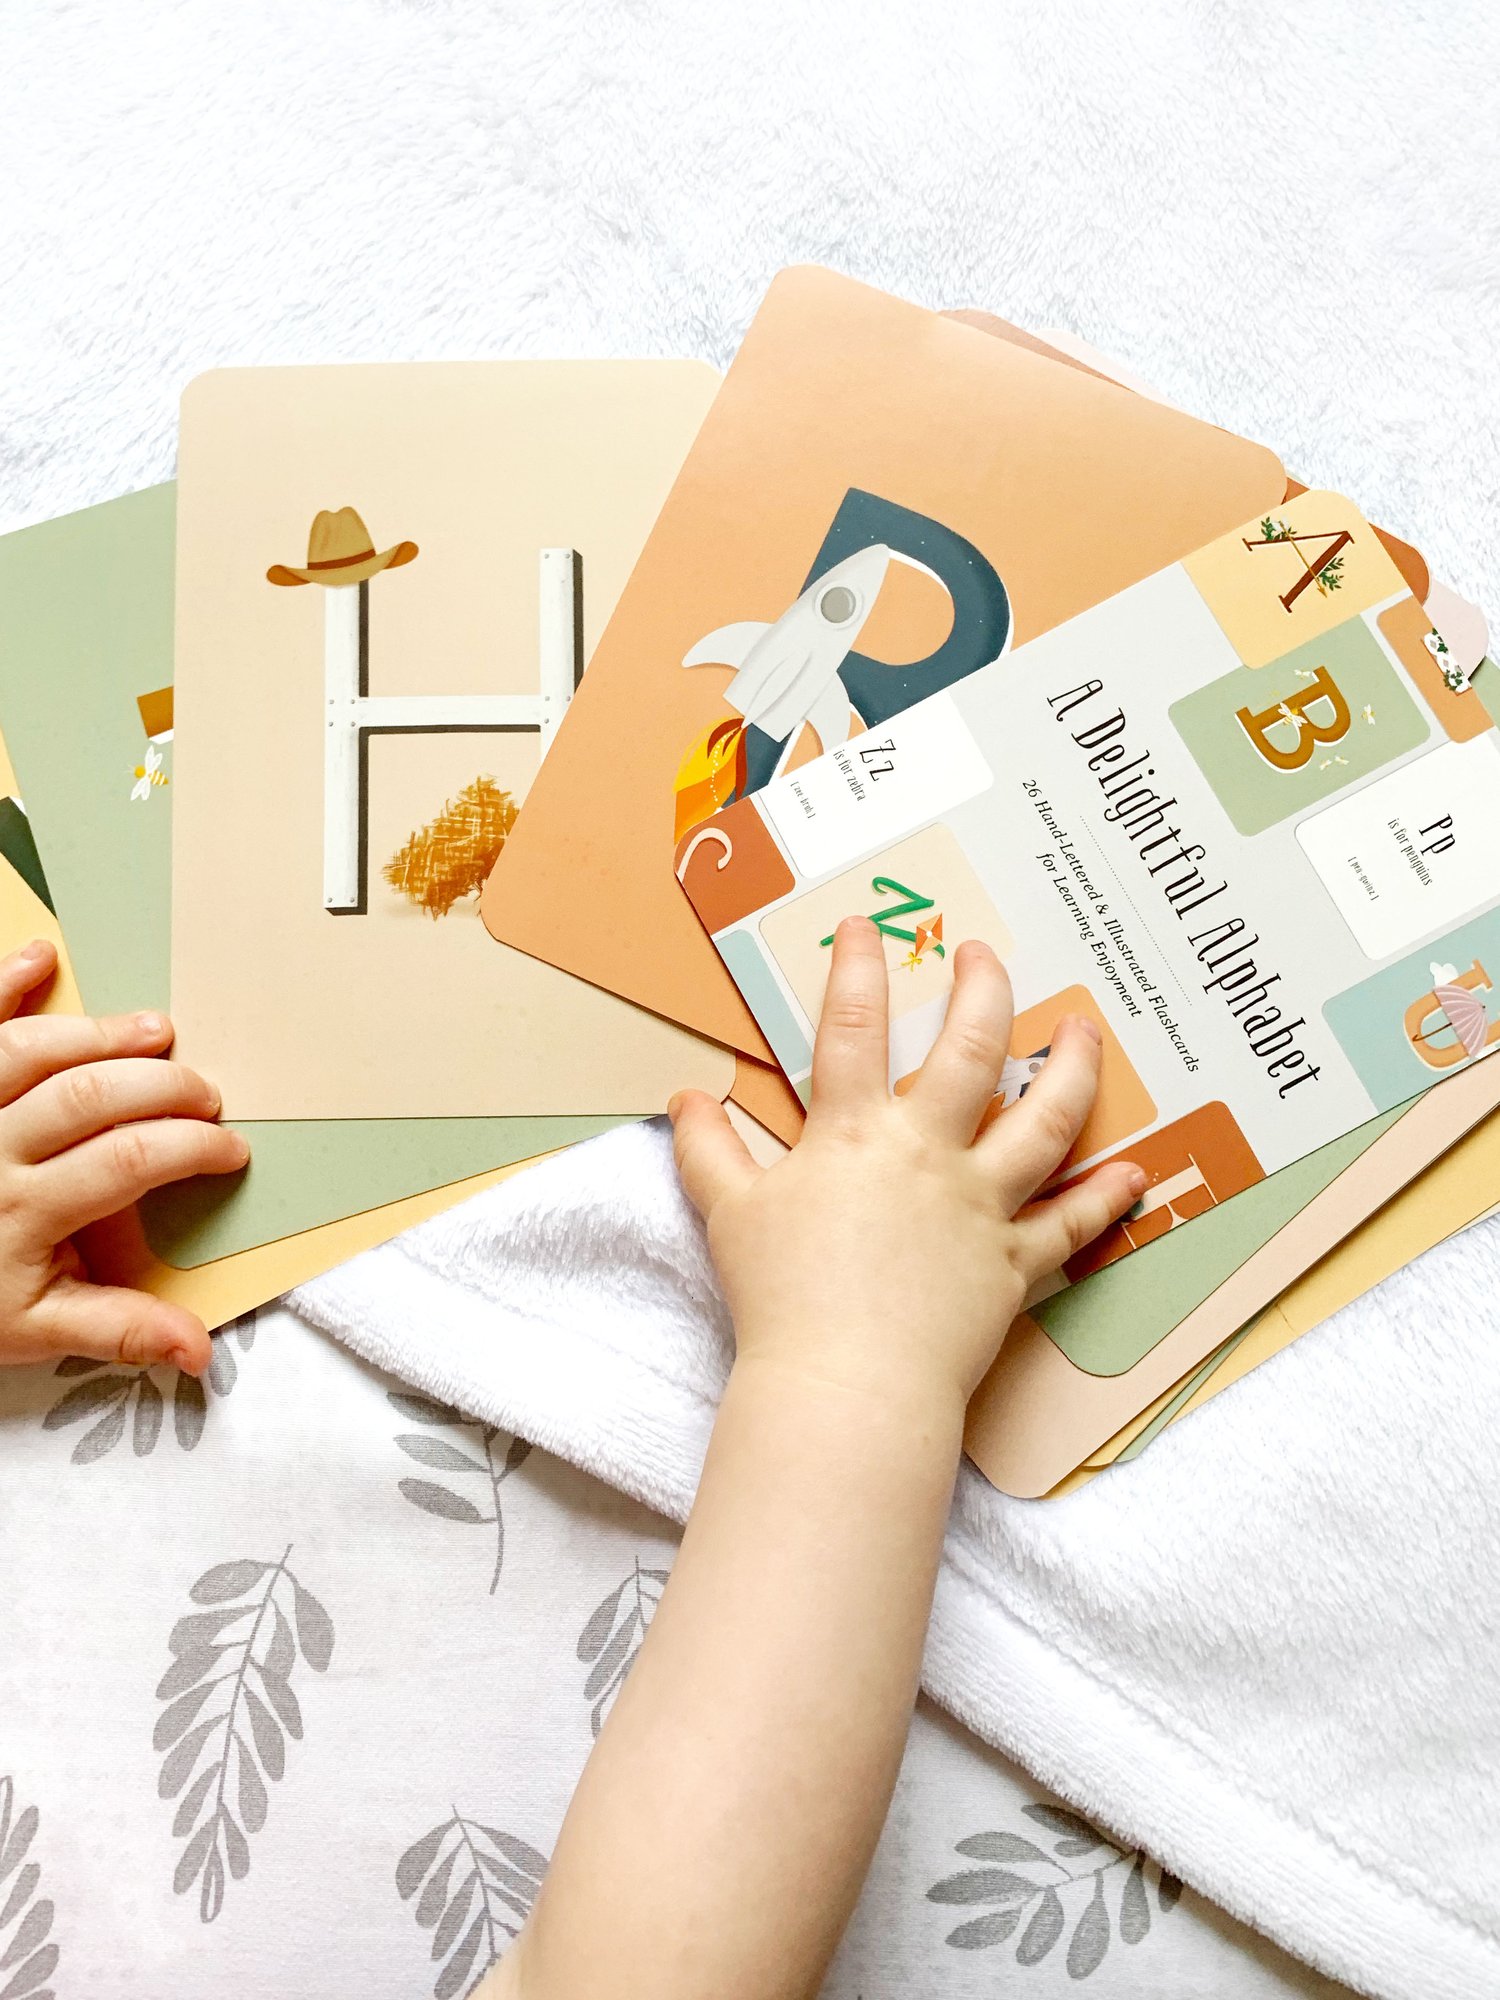 Toddler hands touching set of bright and whimsical alphabet flash cards for girls or boys